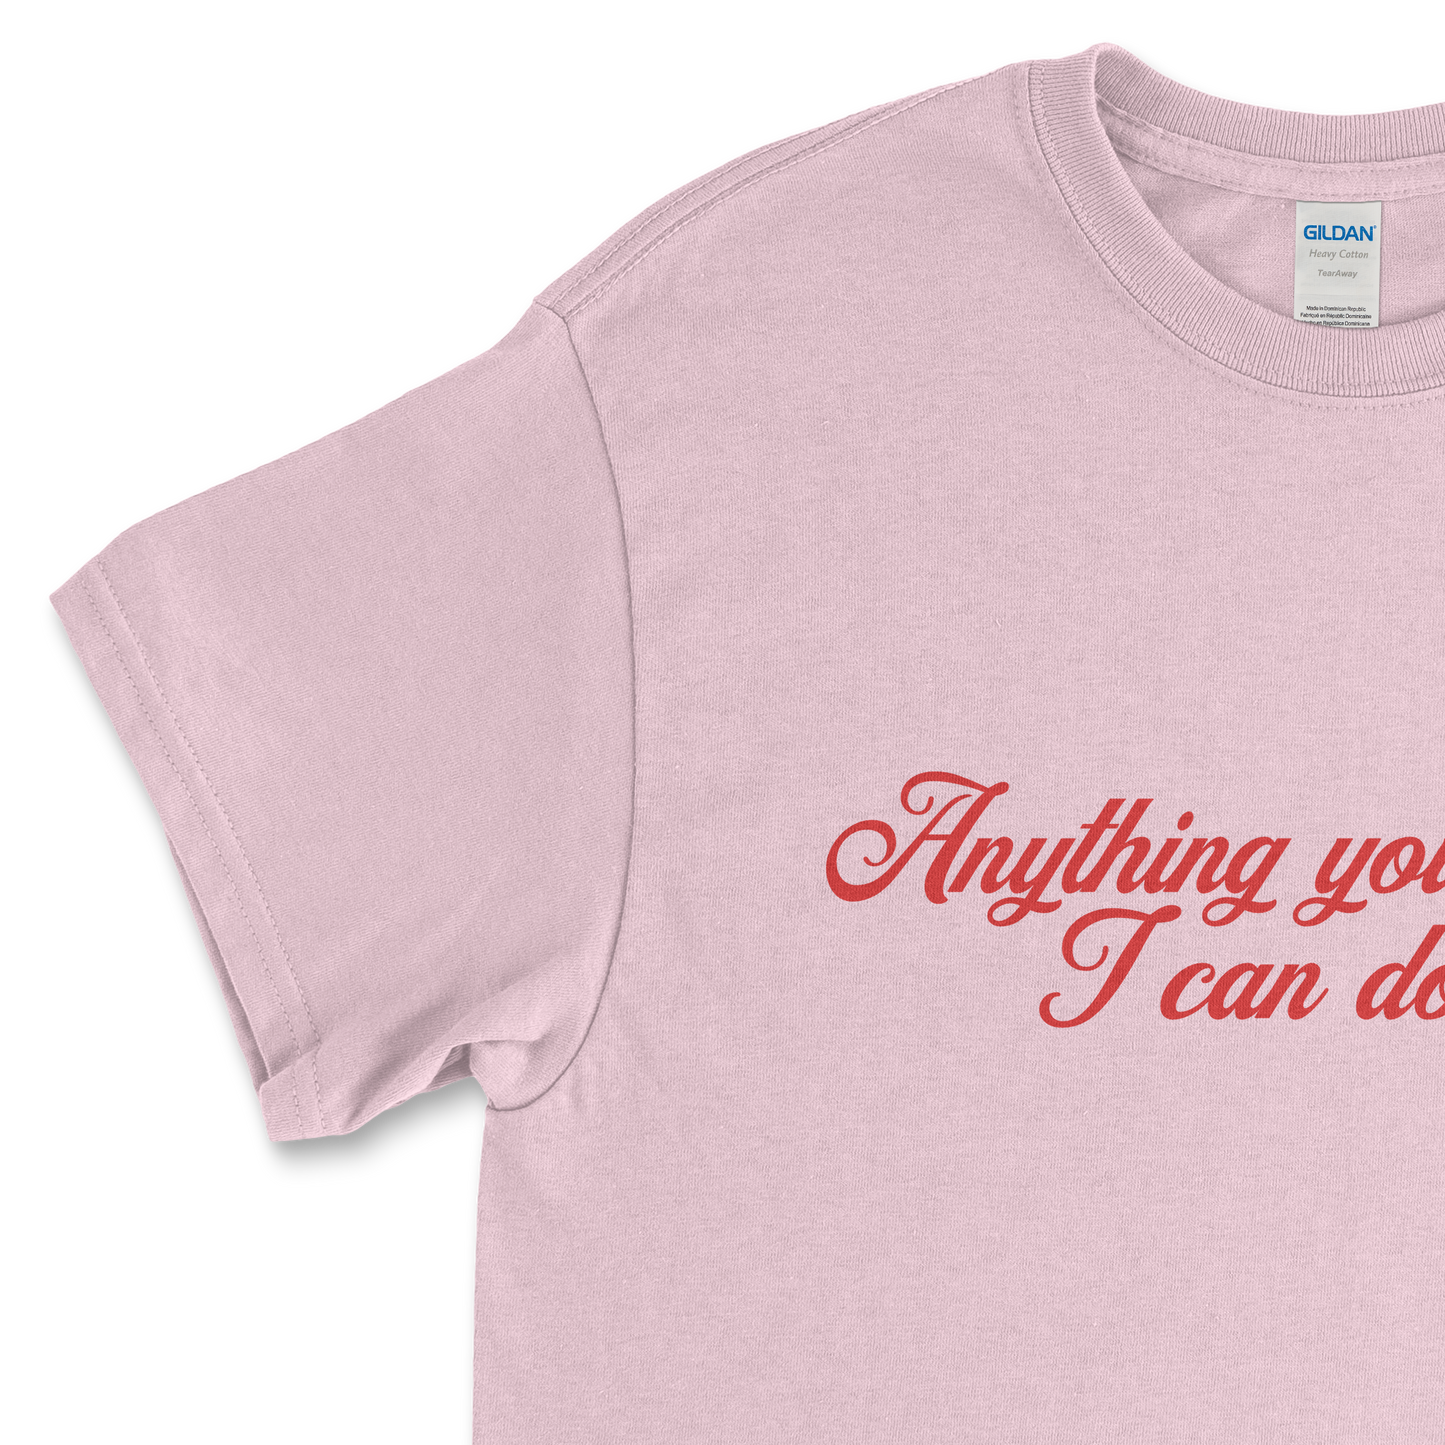 Anything You Can Do, I Can Do Bleeding Feminist T-Shirt